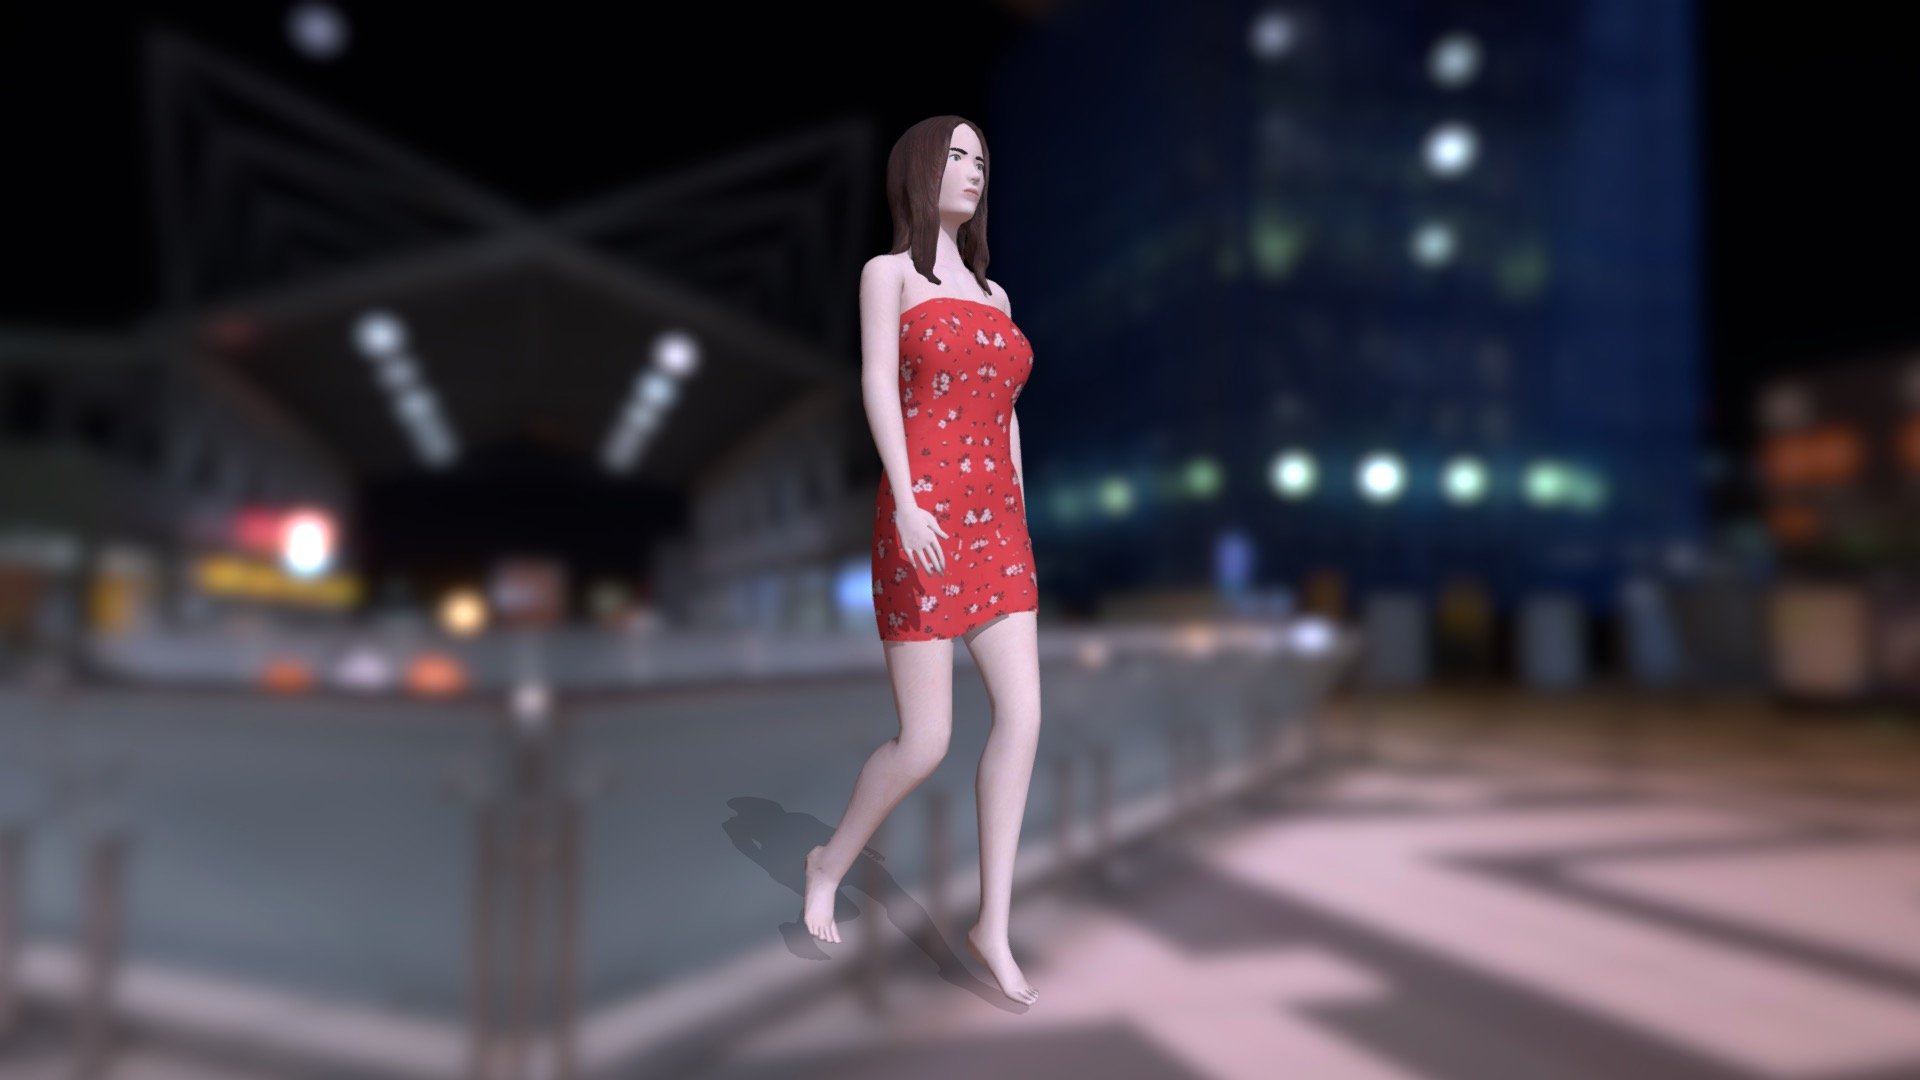 Female Clothed And Animated 3d Model By Sjf 3d 65135e8 Sketchfab